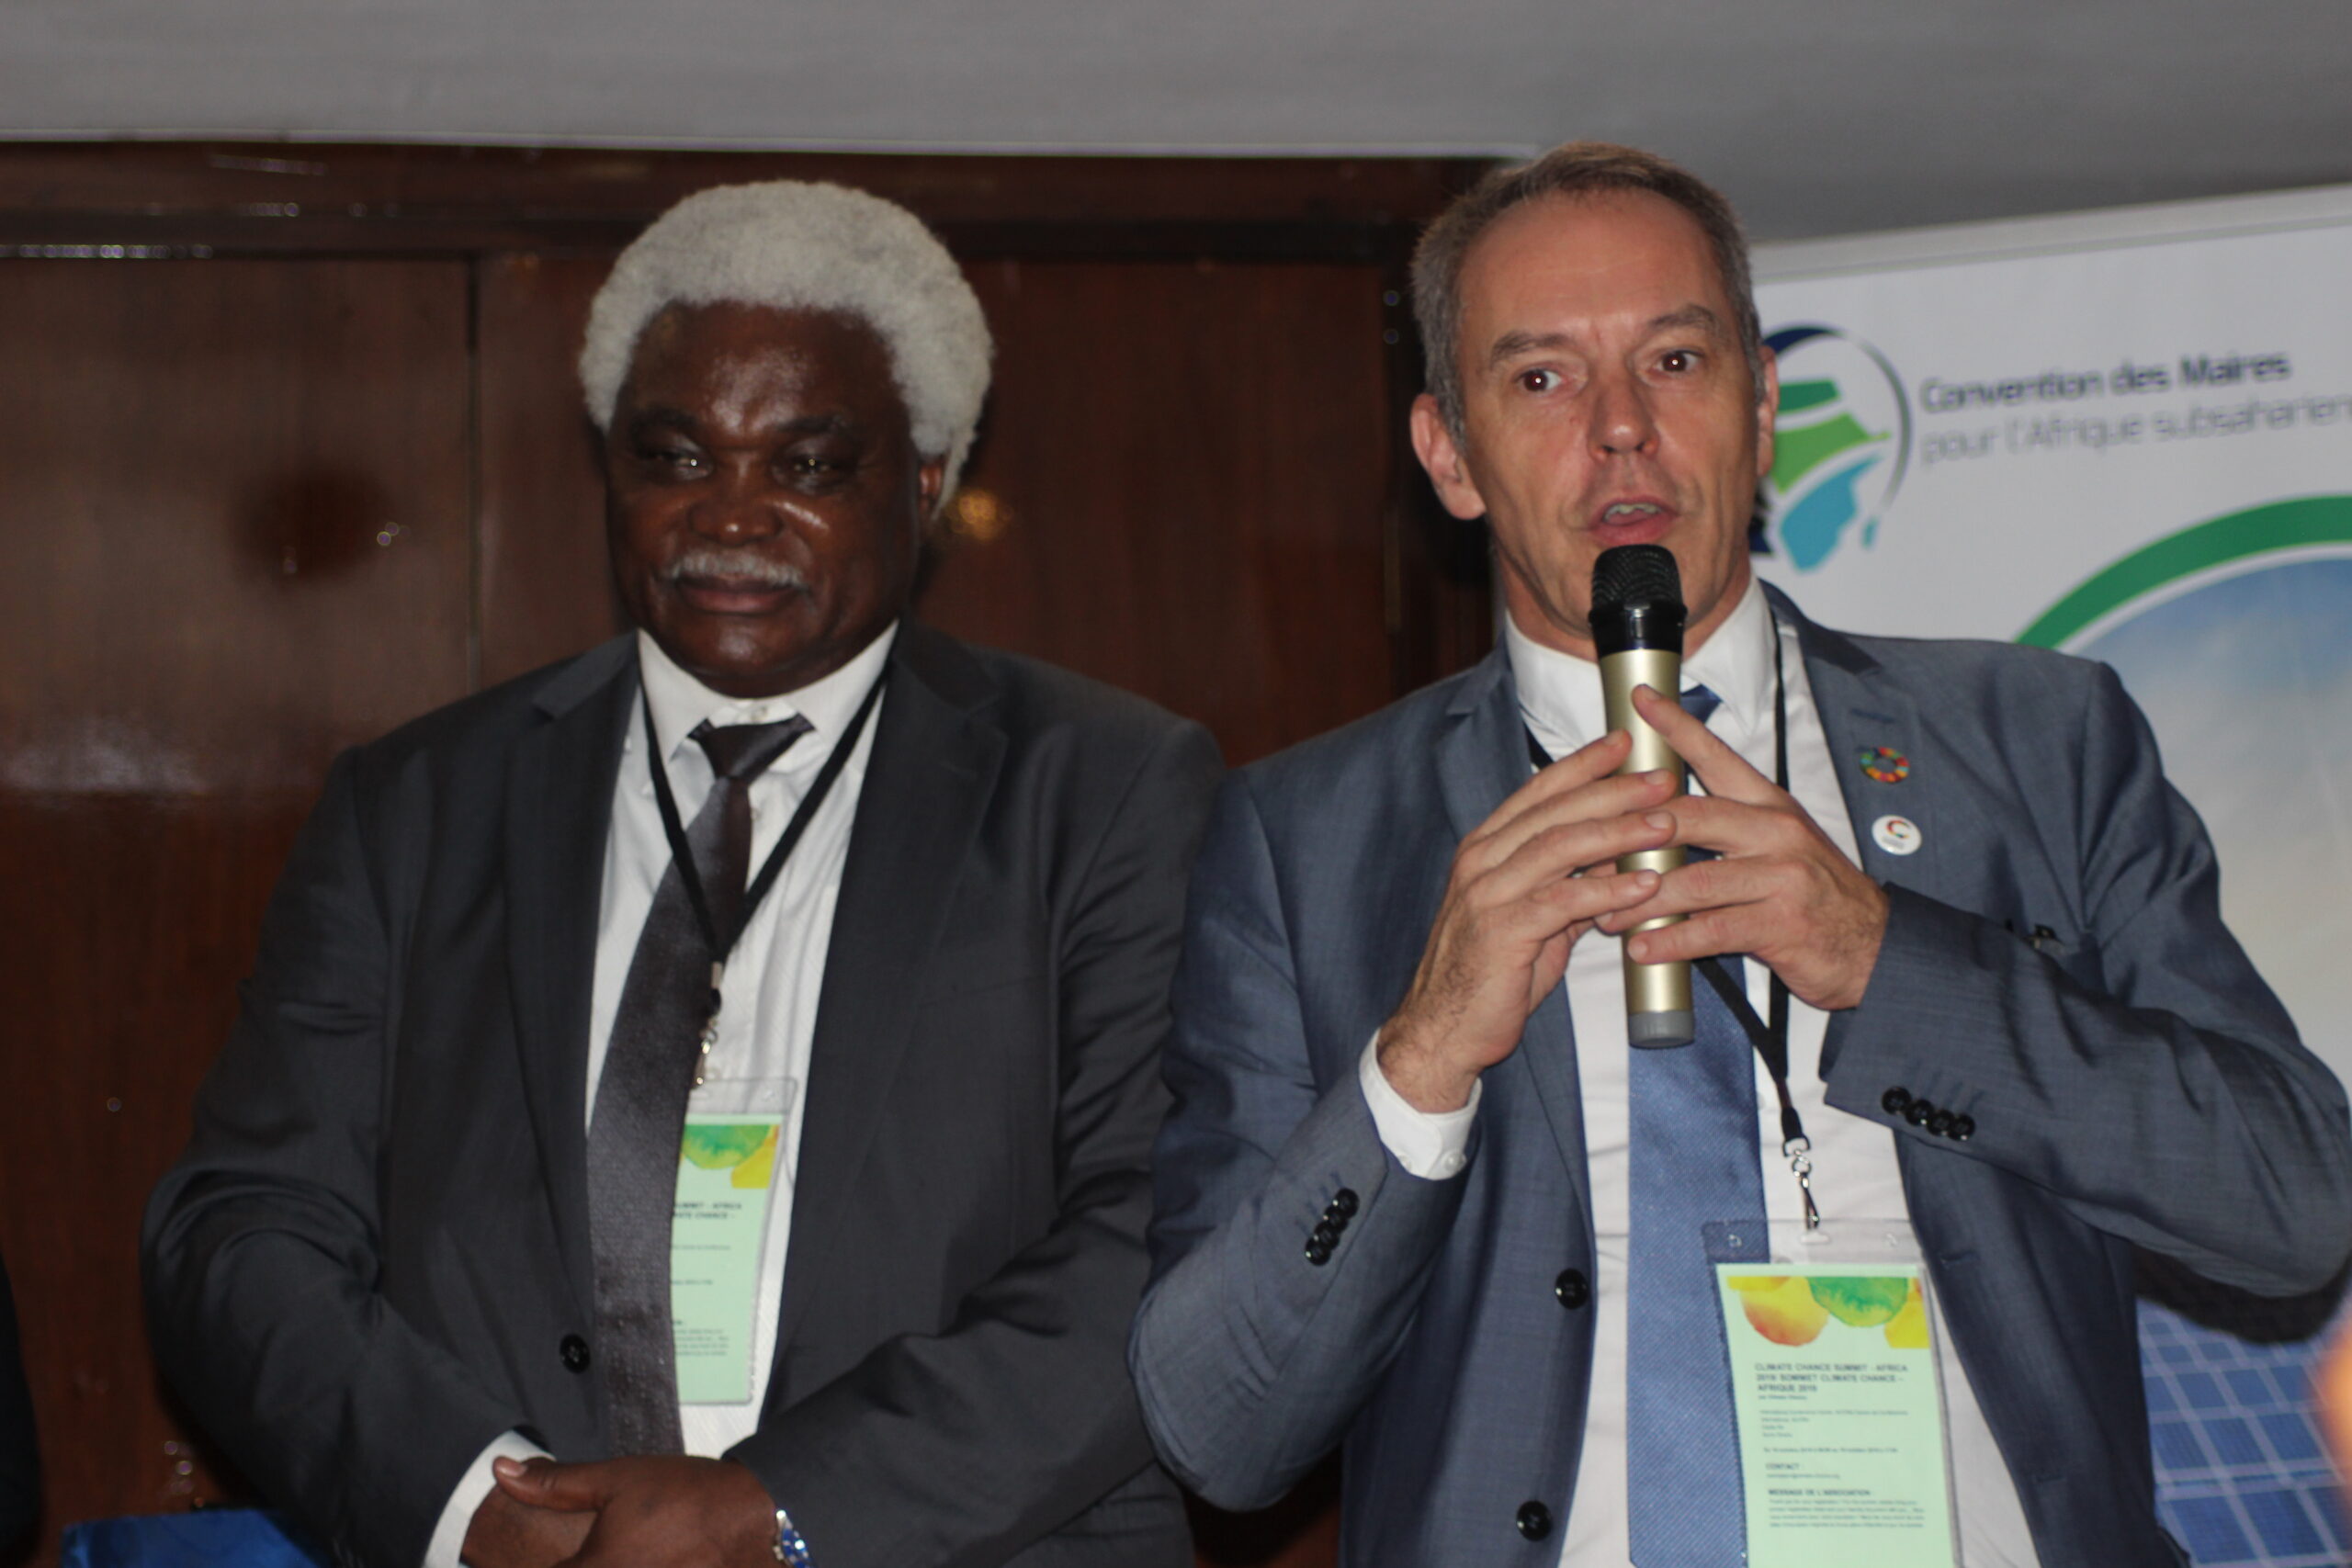 Jean Pierre Elong Mbassi, Secretary General of the United Cities and Local Governments of Africa- UCLG and Frédéric Vallier Secretary General at Council of European Municipalities and Regions-CEMR